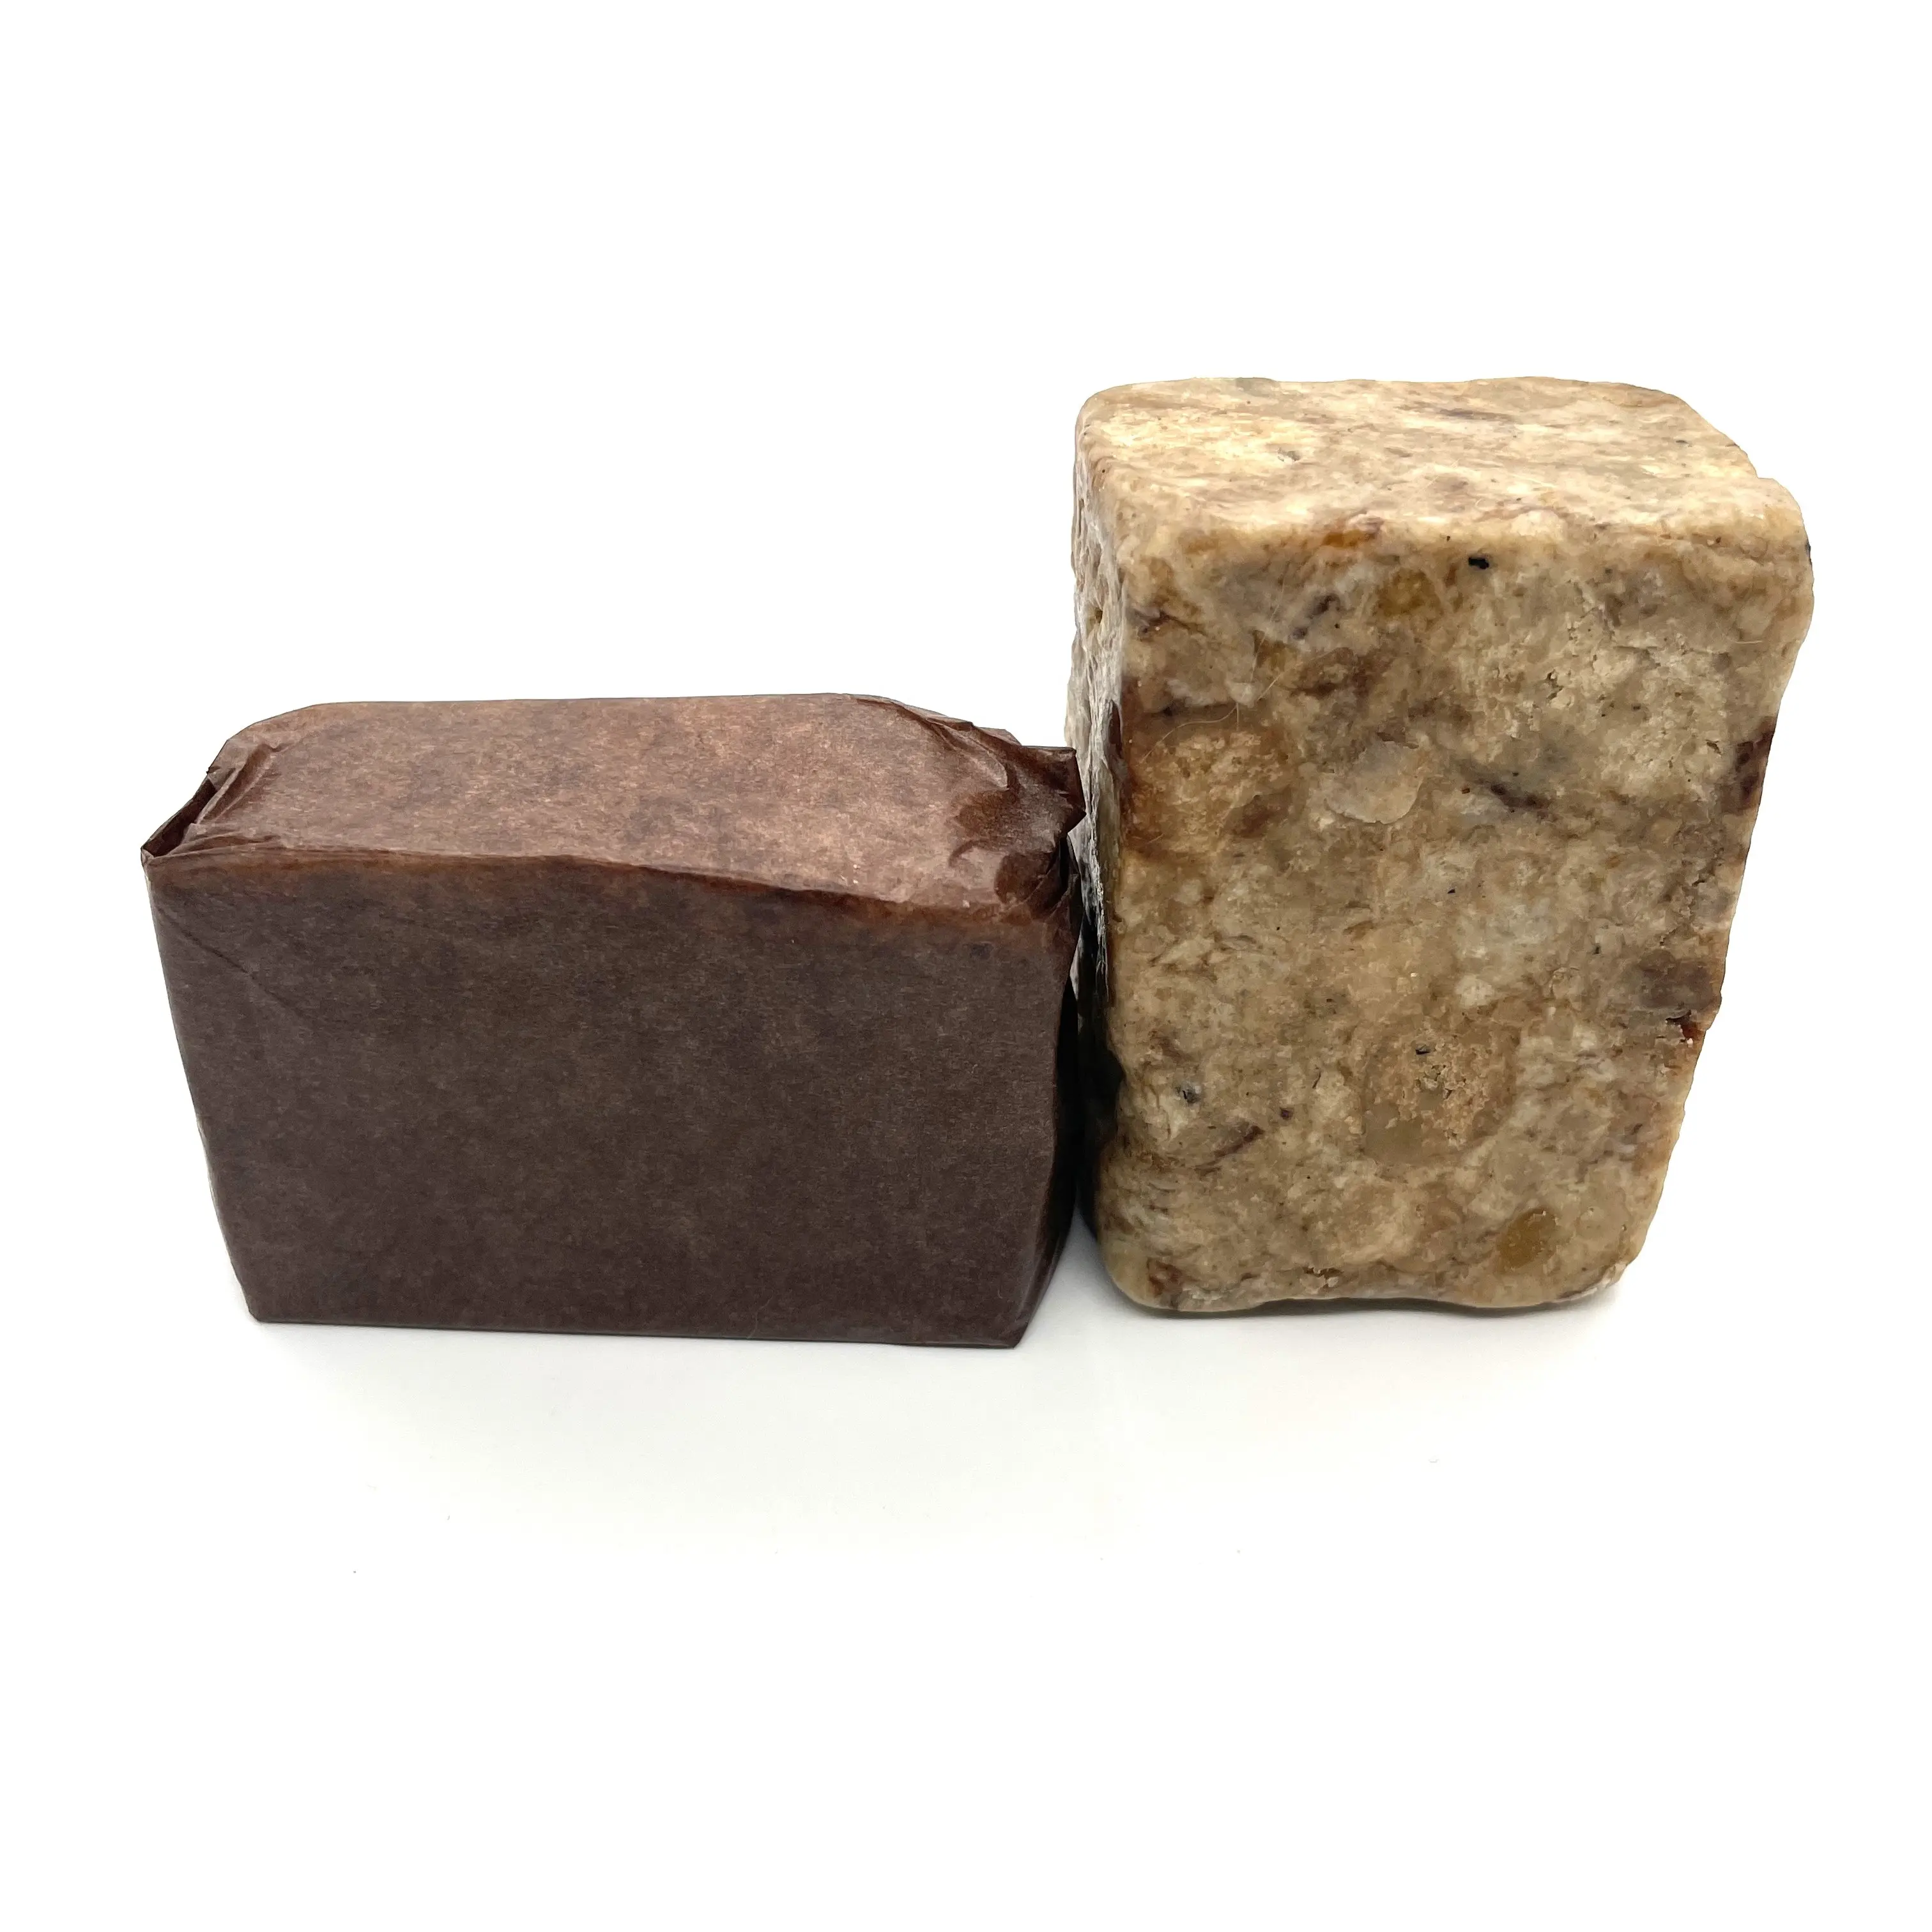 Raw African Black Soap 8oz 100% Raw Natural Acne Patch Adults Anti-aging Female Toilet Soap Hand Face Body Cleaning Regular Size